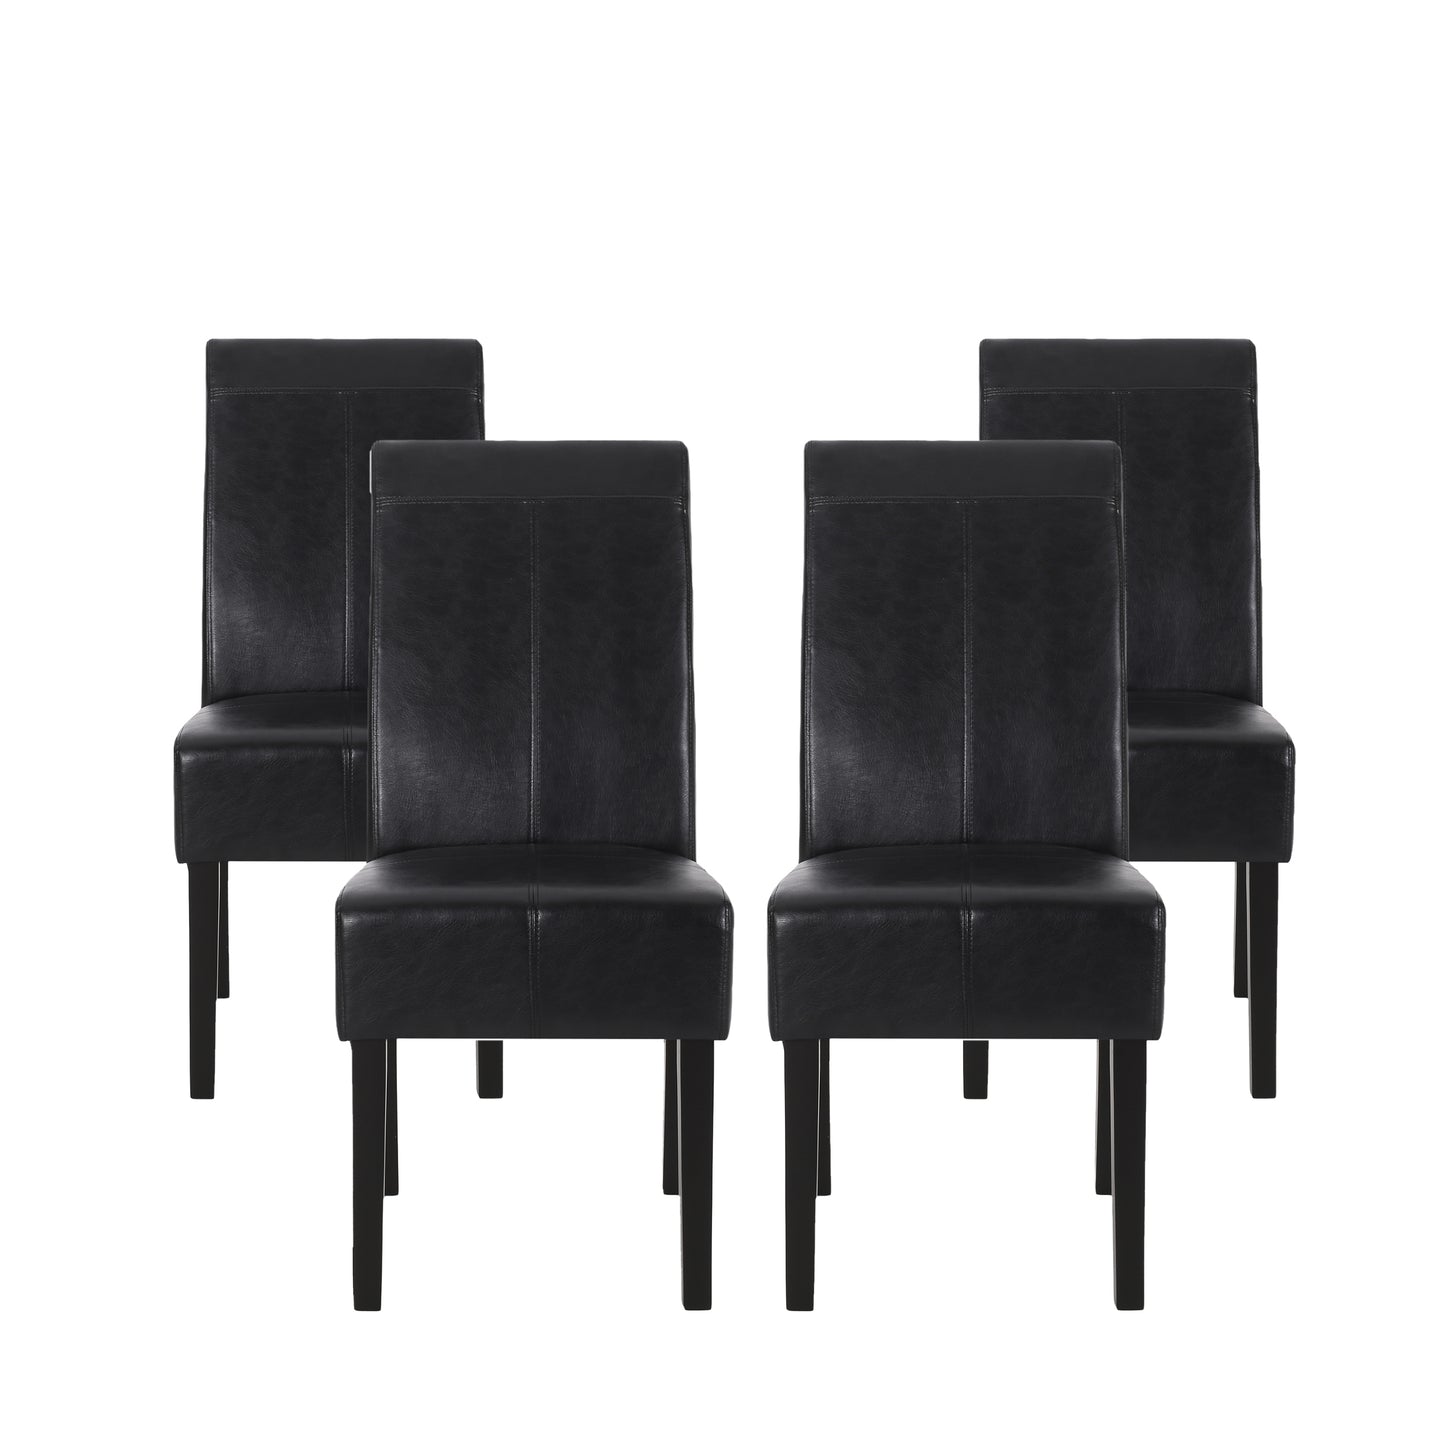 Percival Contemporary Upholstered T-Stitch Dining Chairs, Set of 4